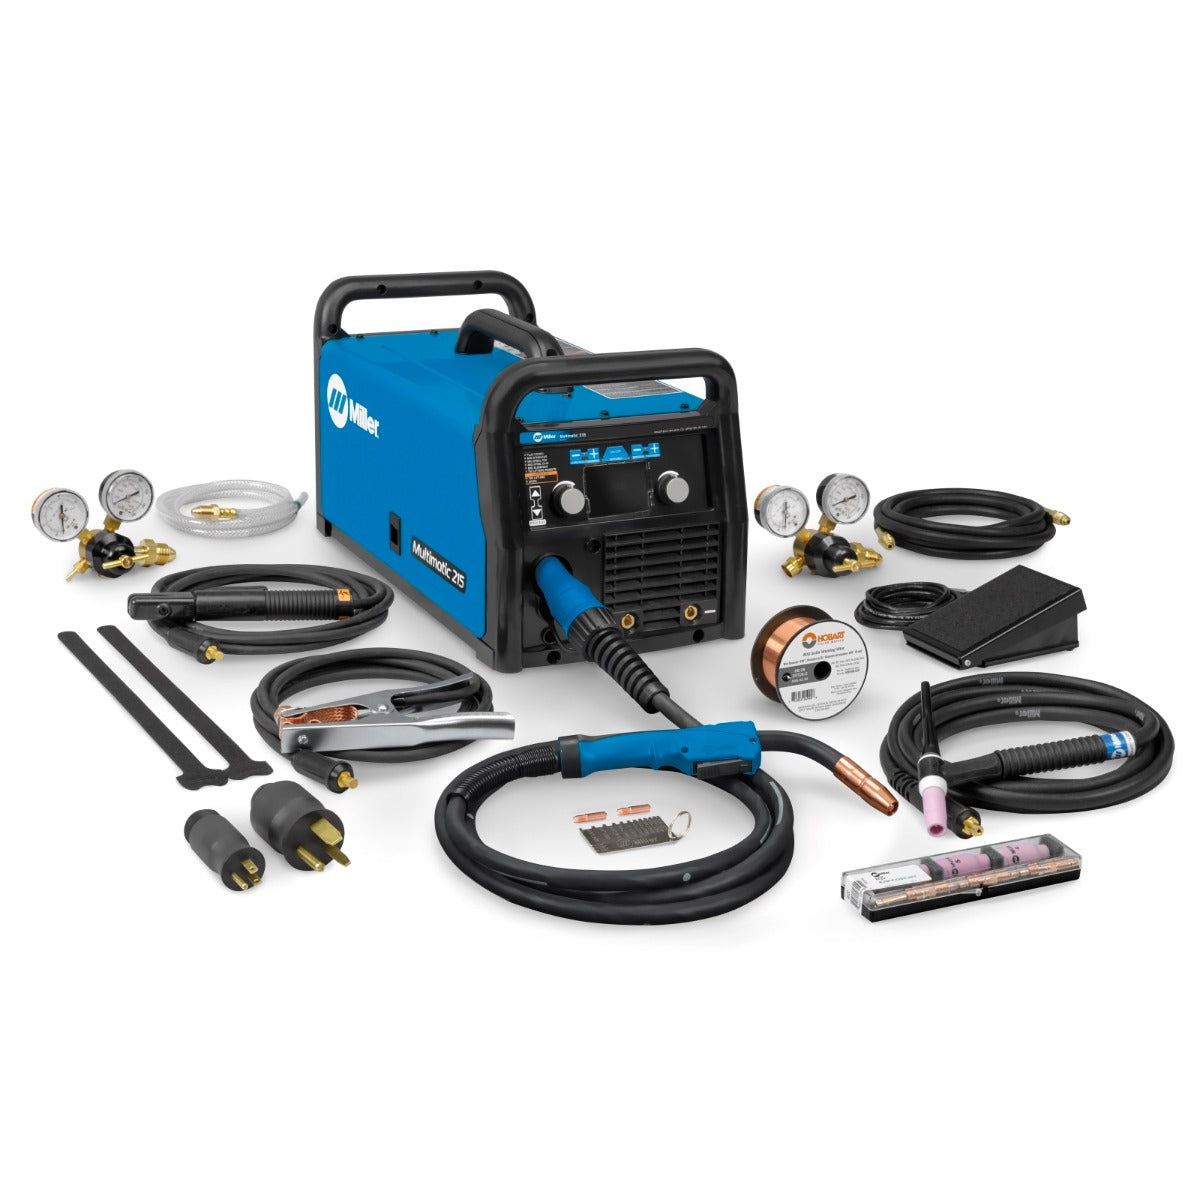 Miller Multimatic 215 Auto-Set Multiprocess Welder with TIG Package (951674)